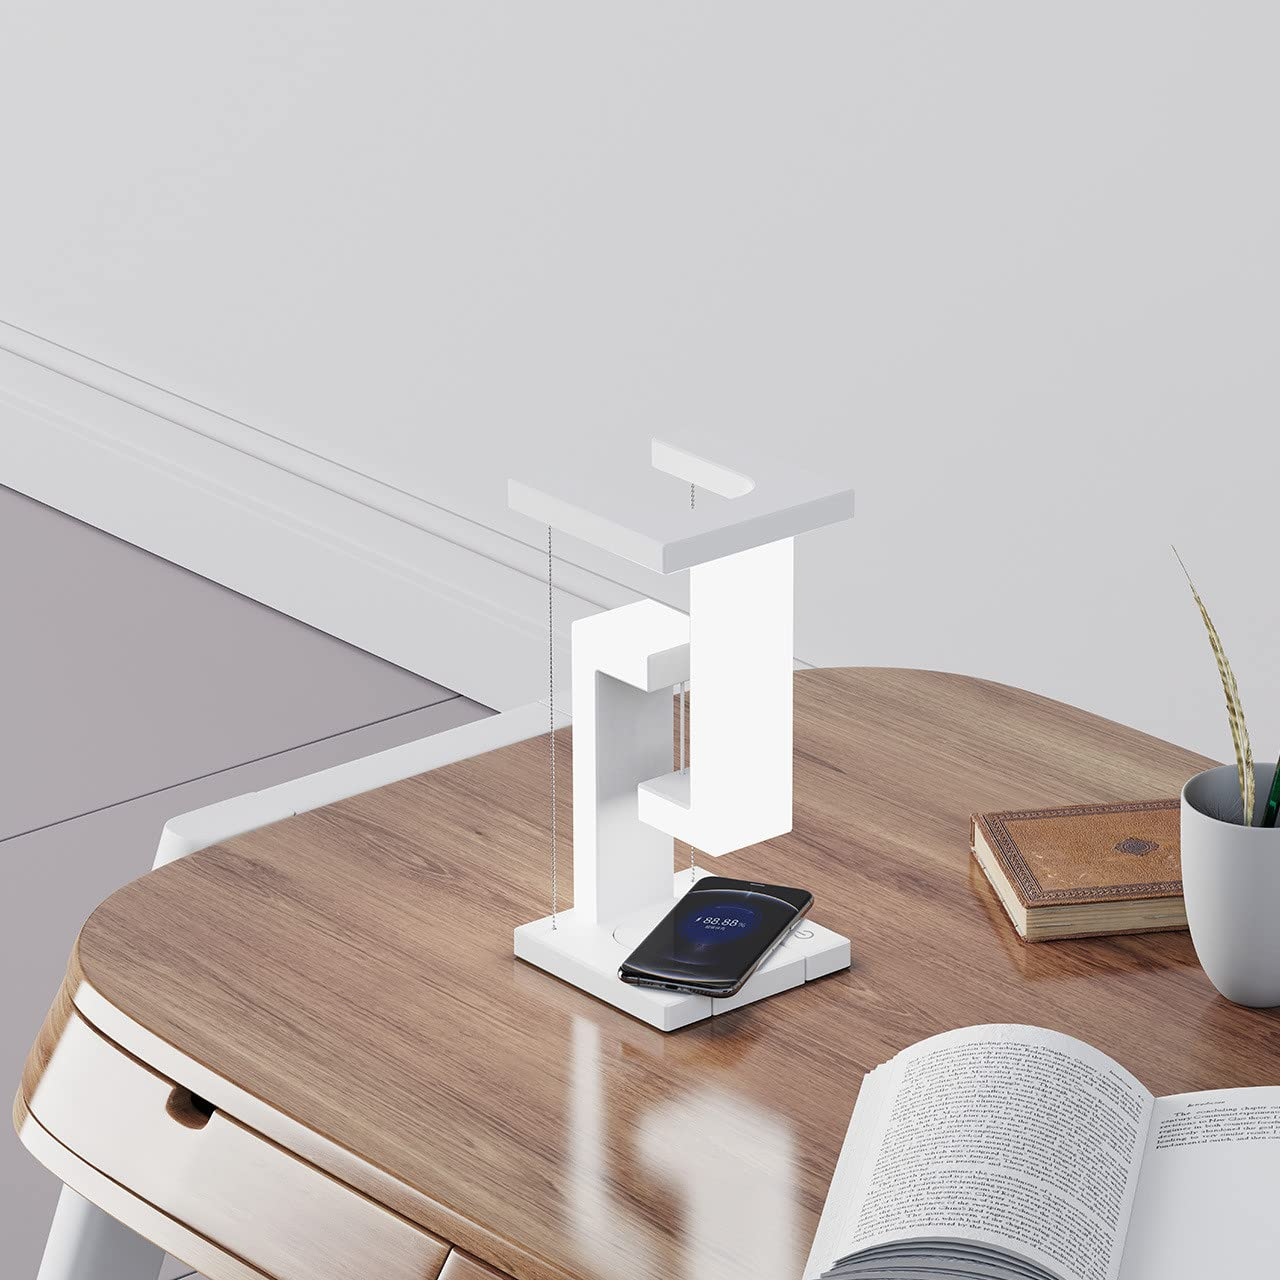 Creative Smartphone Wireless Charging Suspension Table Lamp Balance Lamp Floating For Home Bedroom - Asanjar